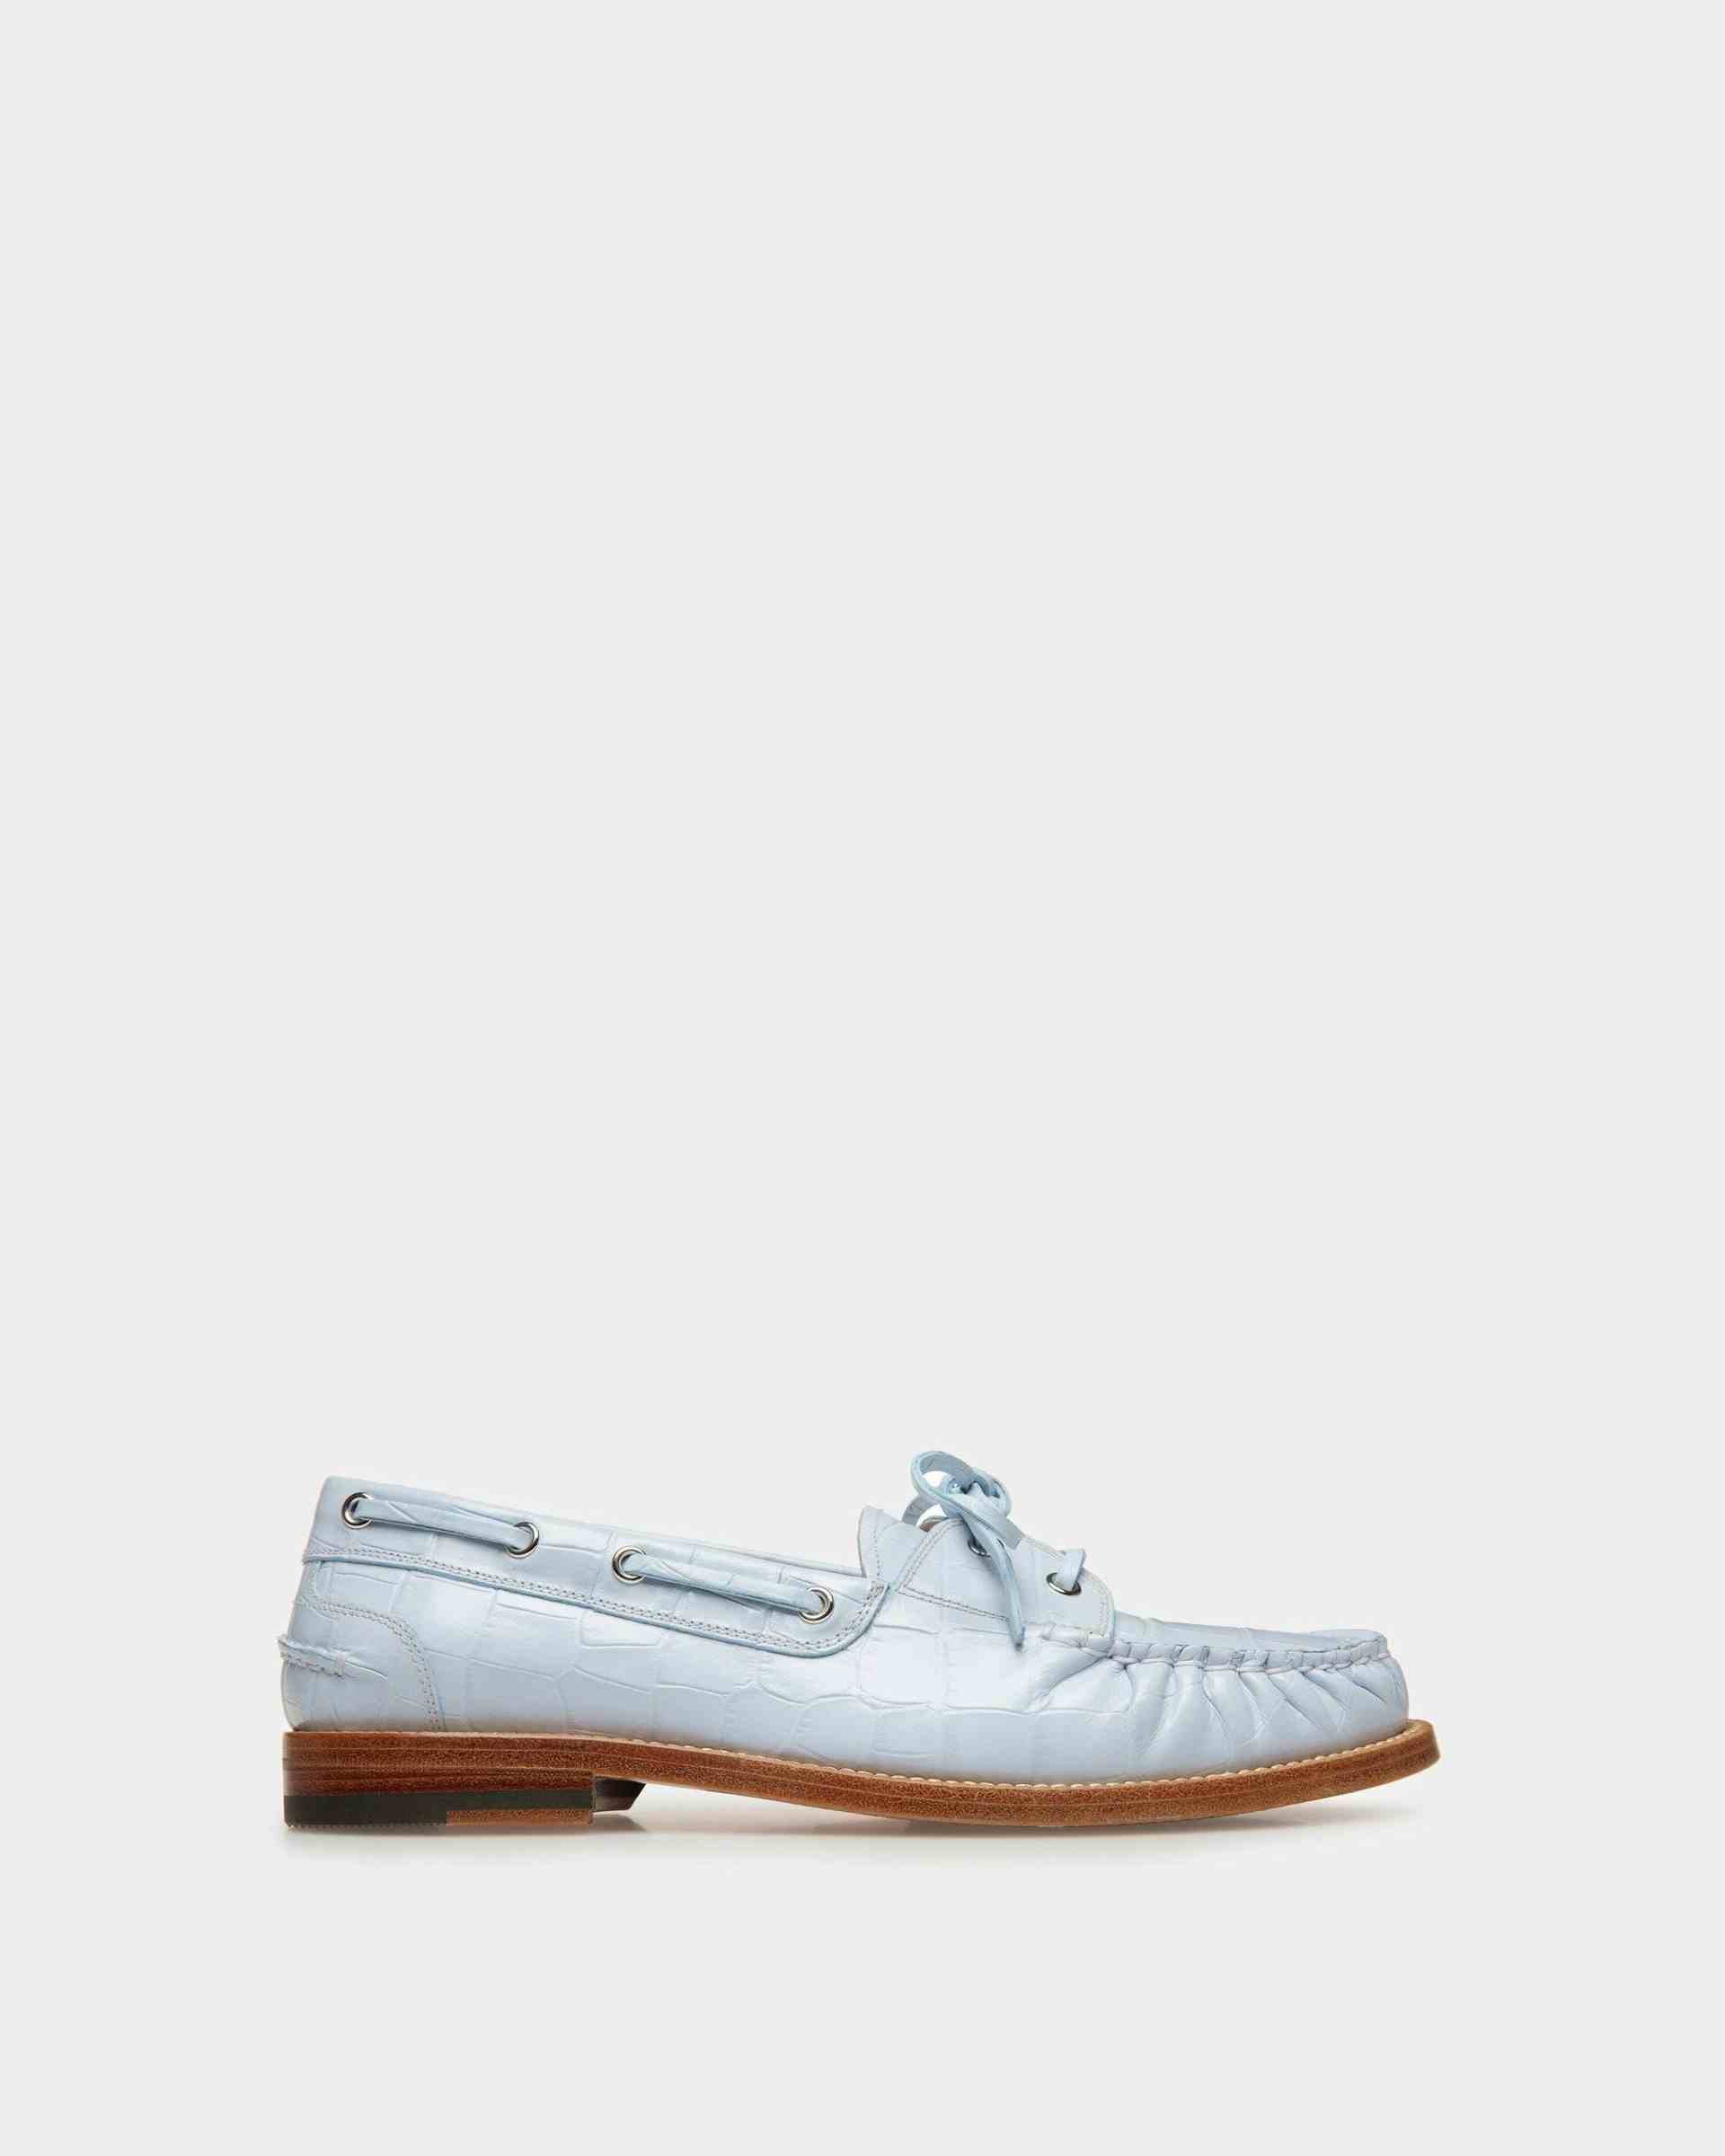 Rome Moccasins In Light Blue Leather - Women's - Bally